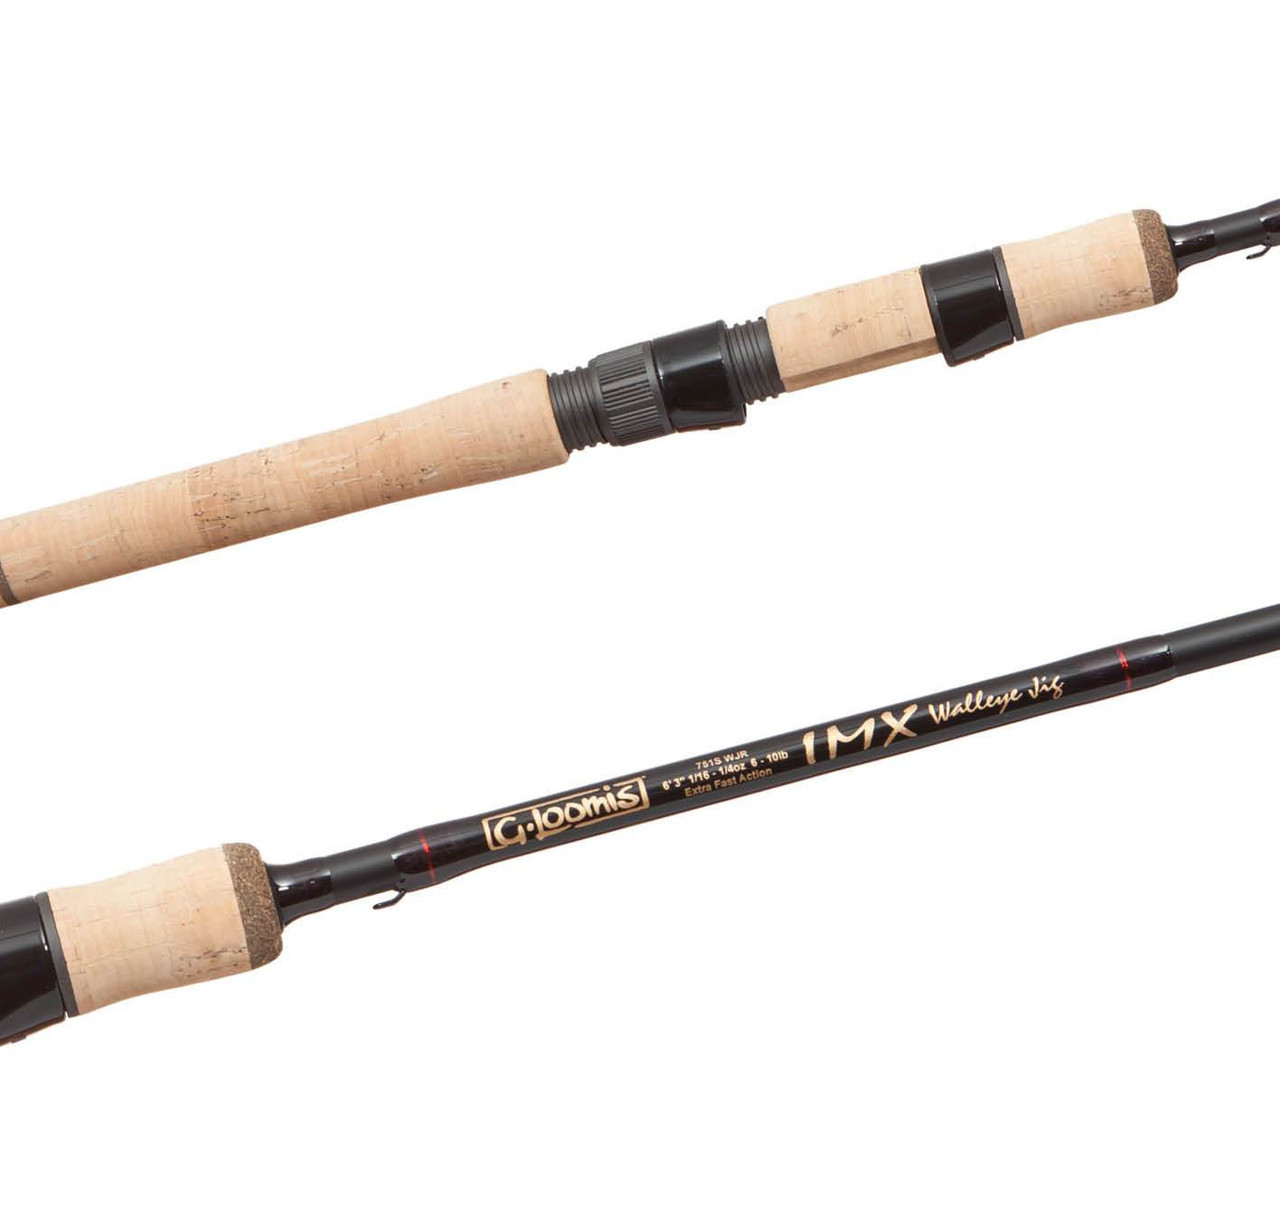 https://cdn11.bigcommerce.com/s-i6ykqoitnd/images/stencil/1280x1280/products/11780/65044/g-loomis-imx-walleye-vertical-jig-rods-spinning-walleye-rods-g-loomis-383477__43610.1639601136.1280.1280__35881.1700705004.jpg?c=1